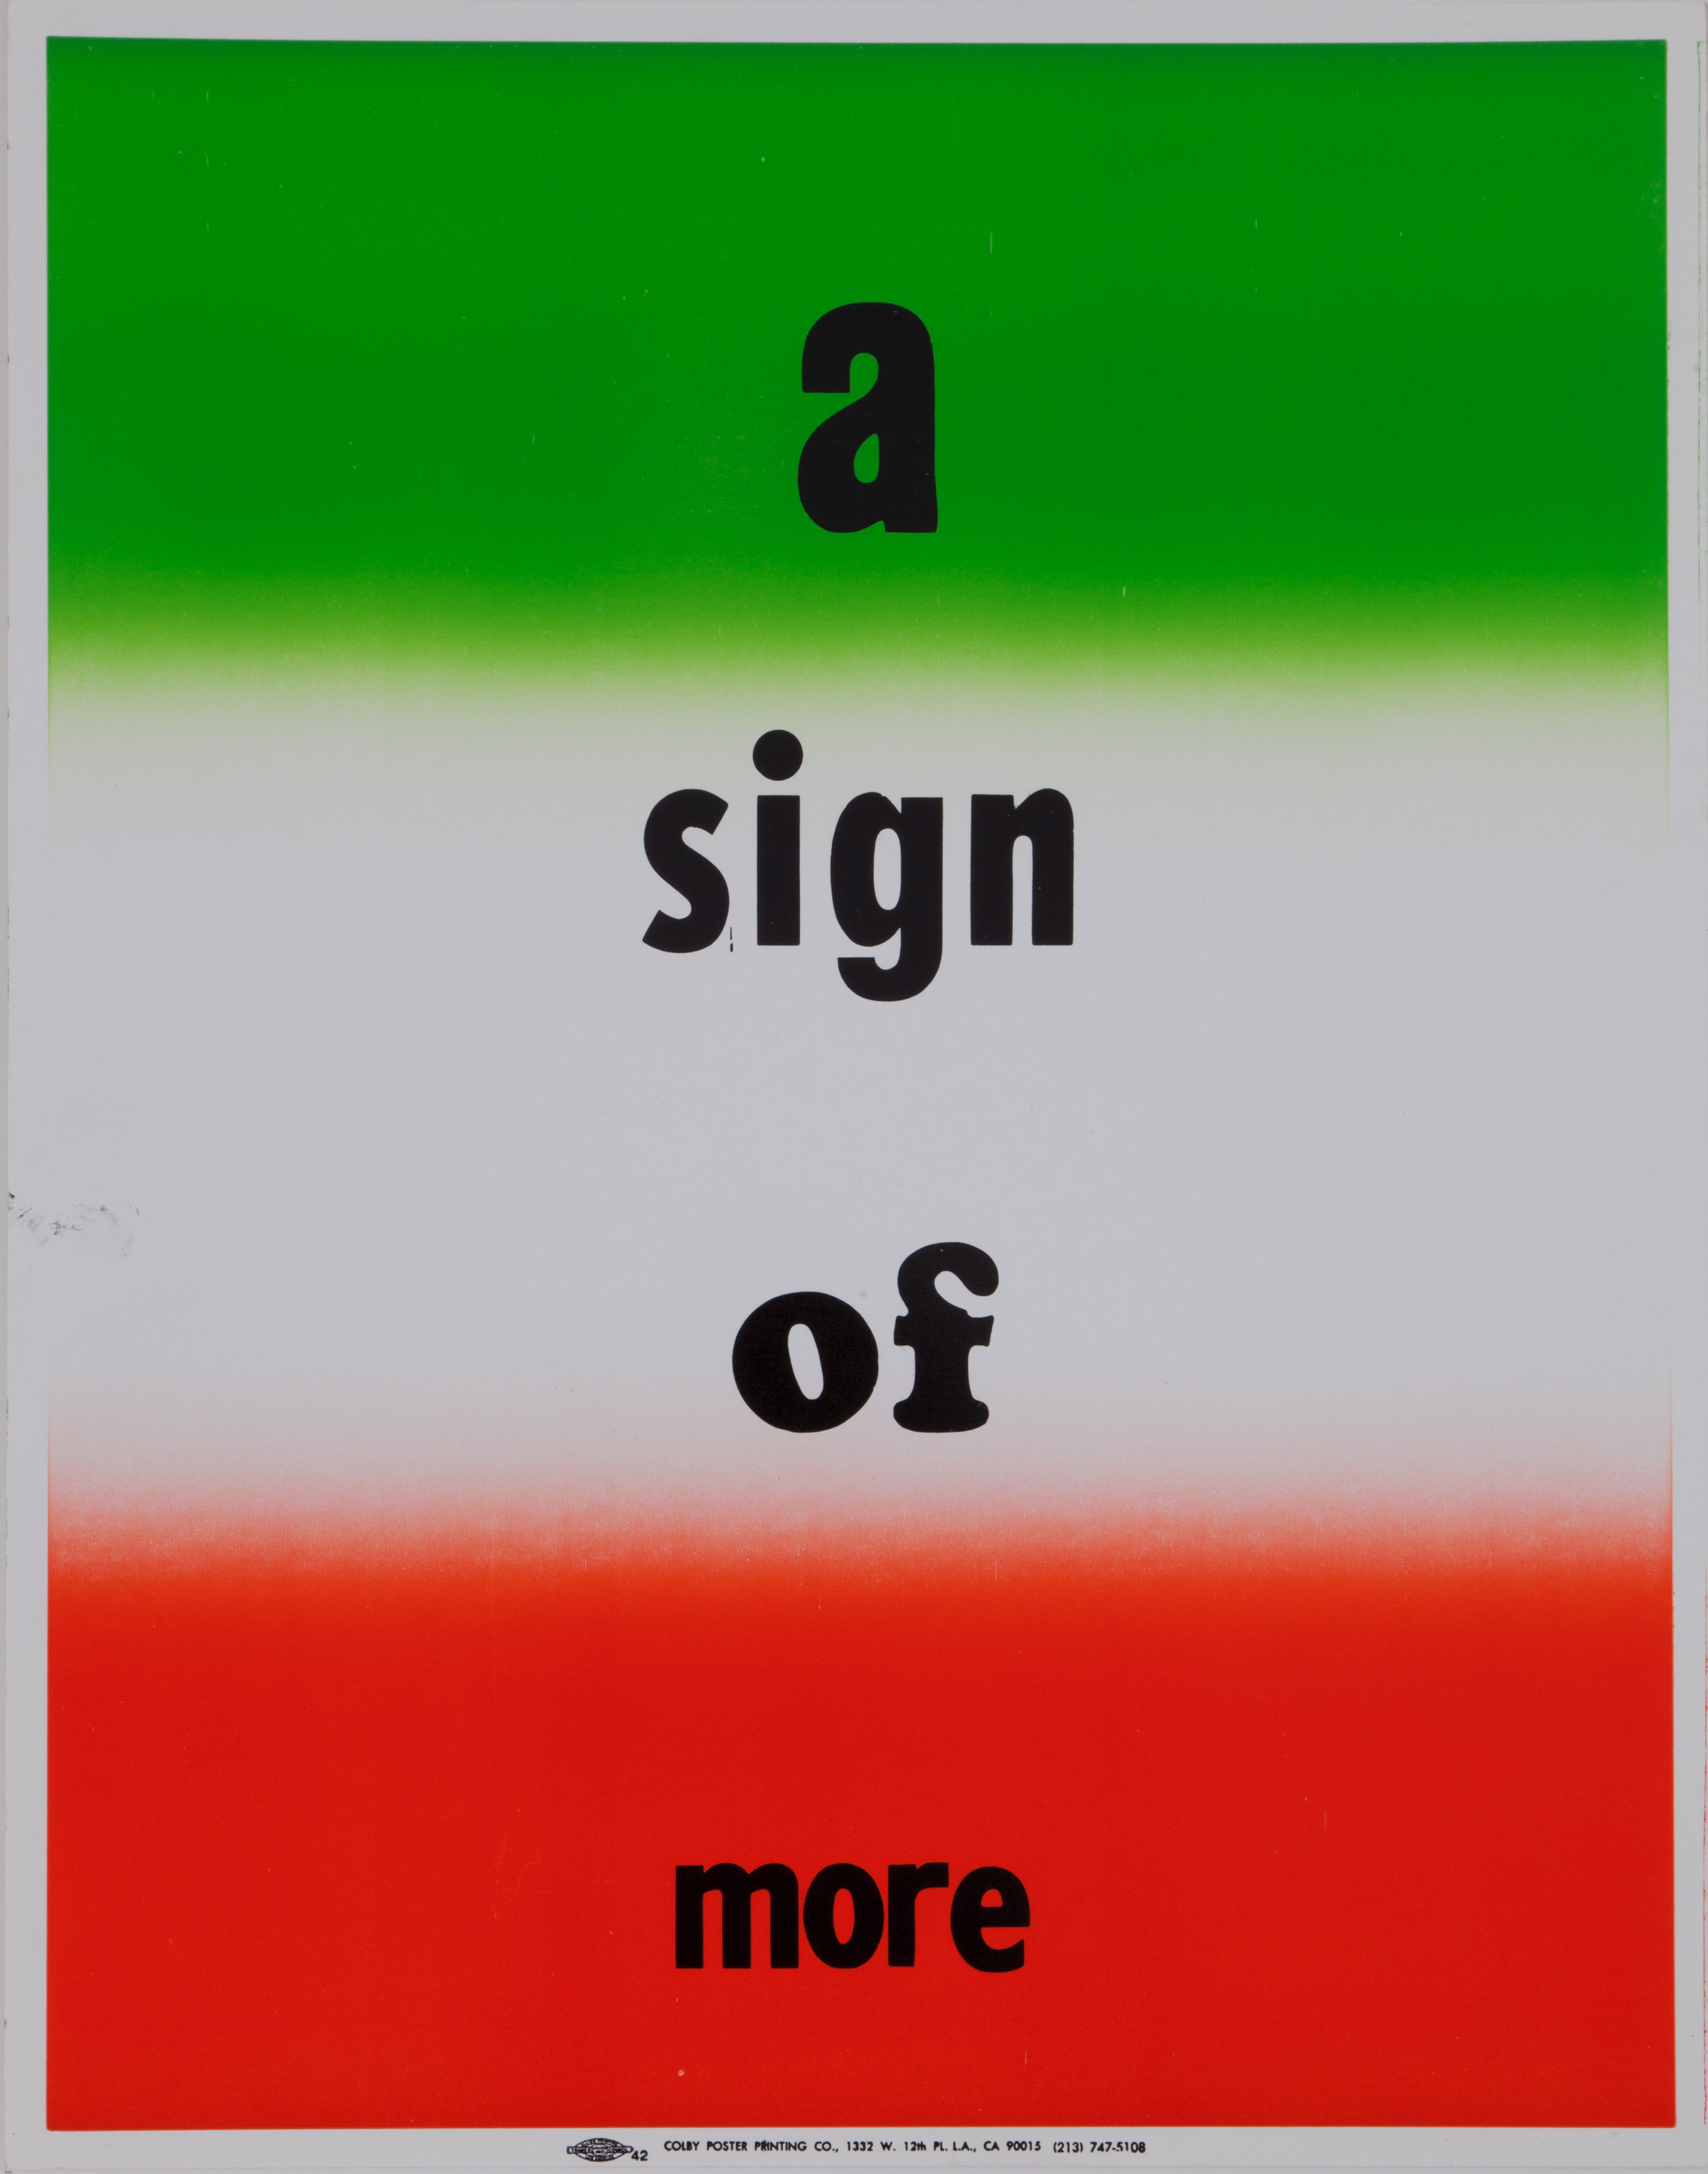  Eve Fowler,  a sign of more , from  a spectacle and nothing strange , 2011–12, a series of screen print posters, 28” x 22”. Courtesy of the artist.  